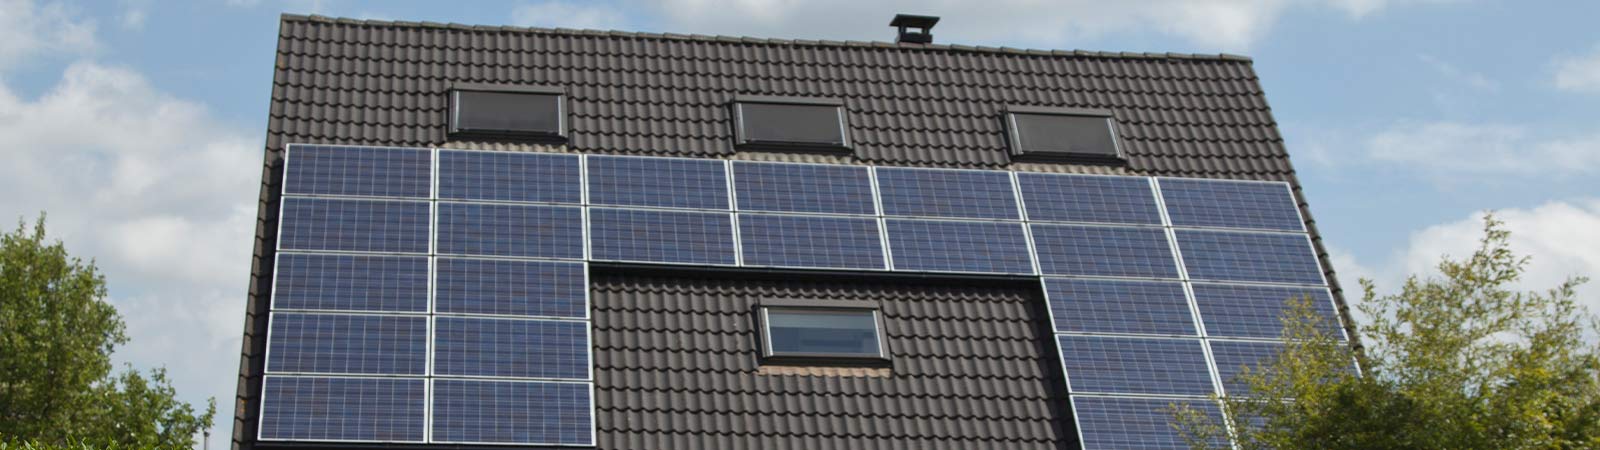 Image of a house roof with solar panels